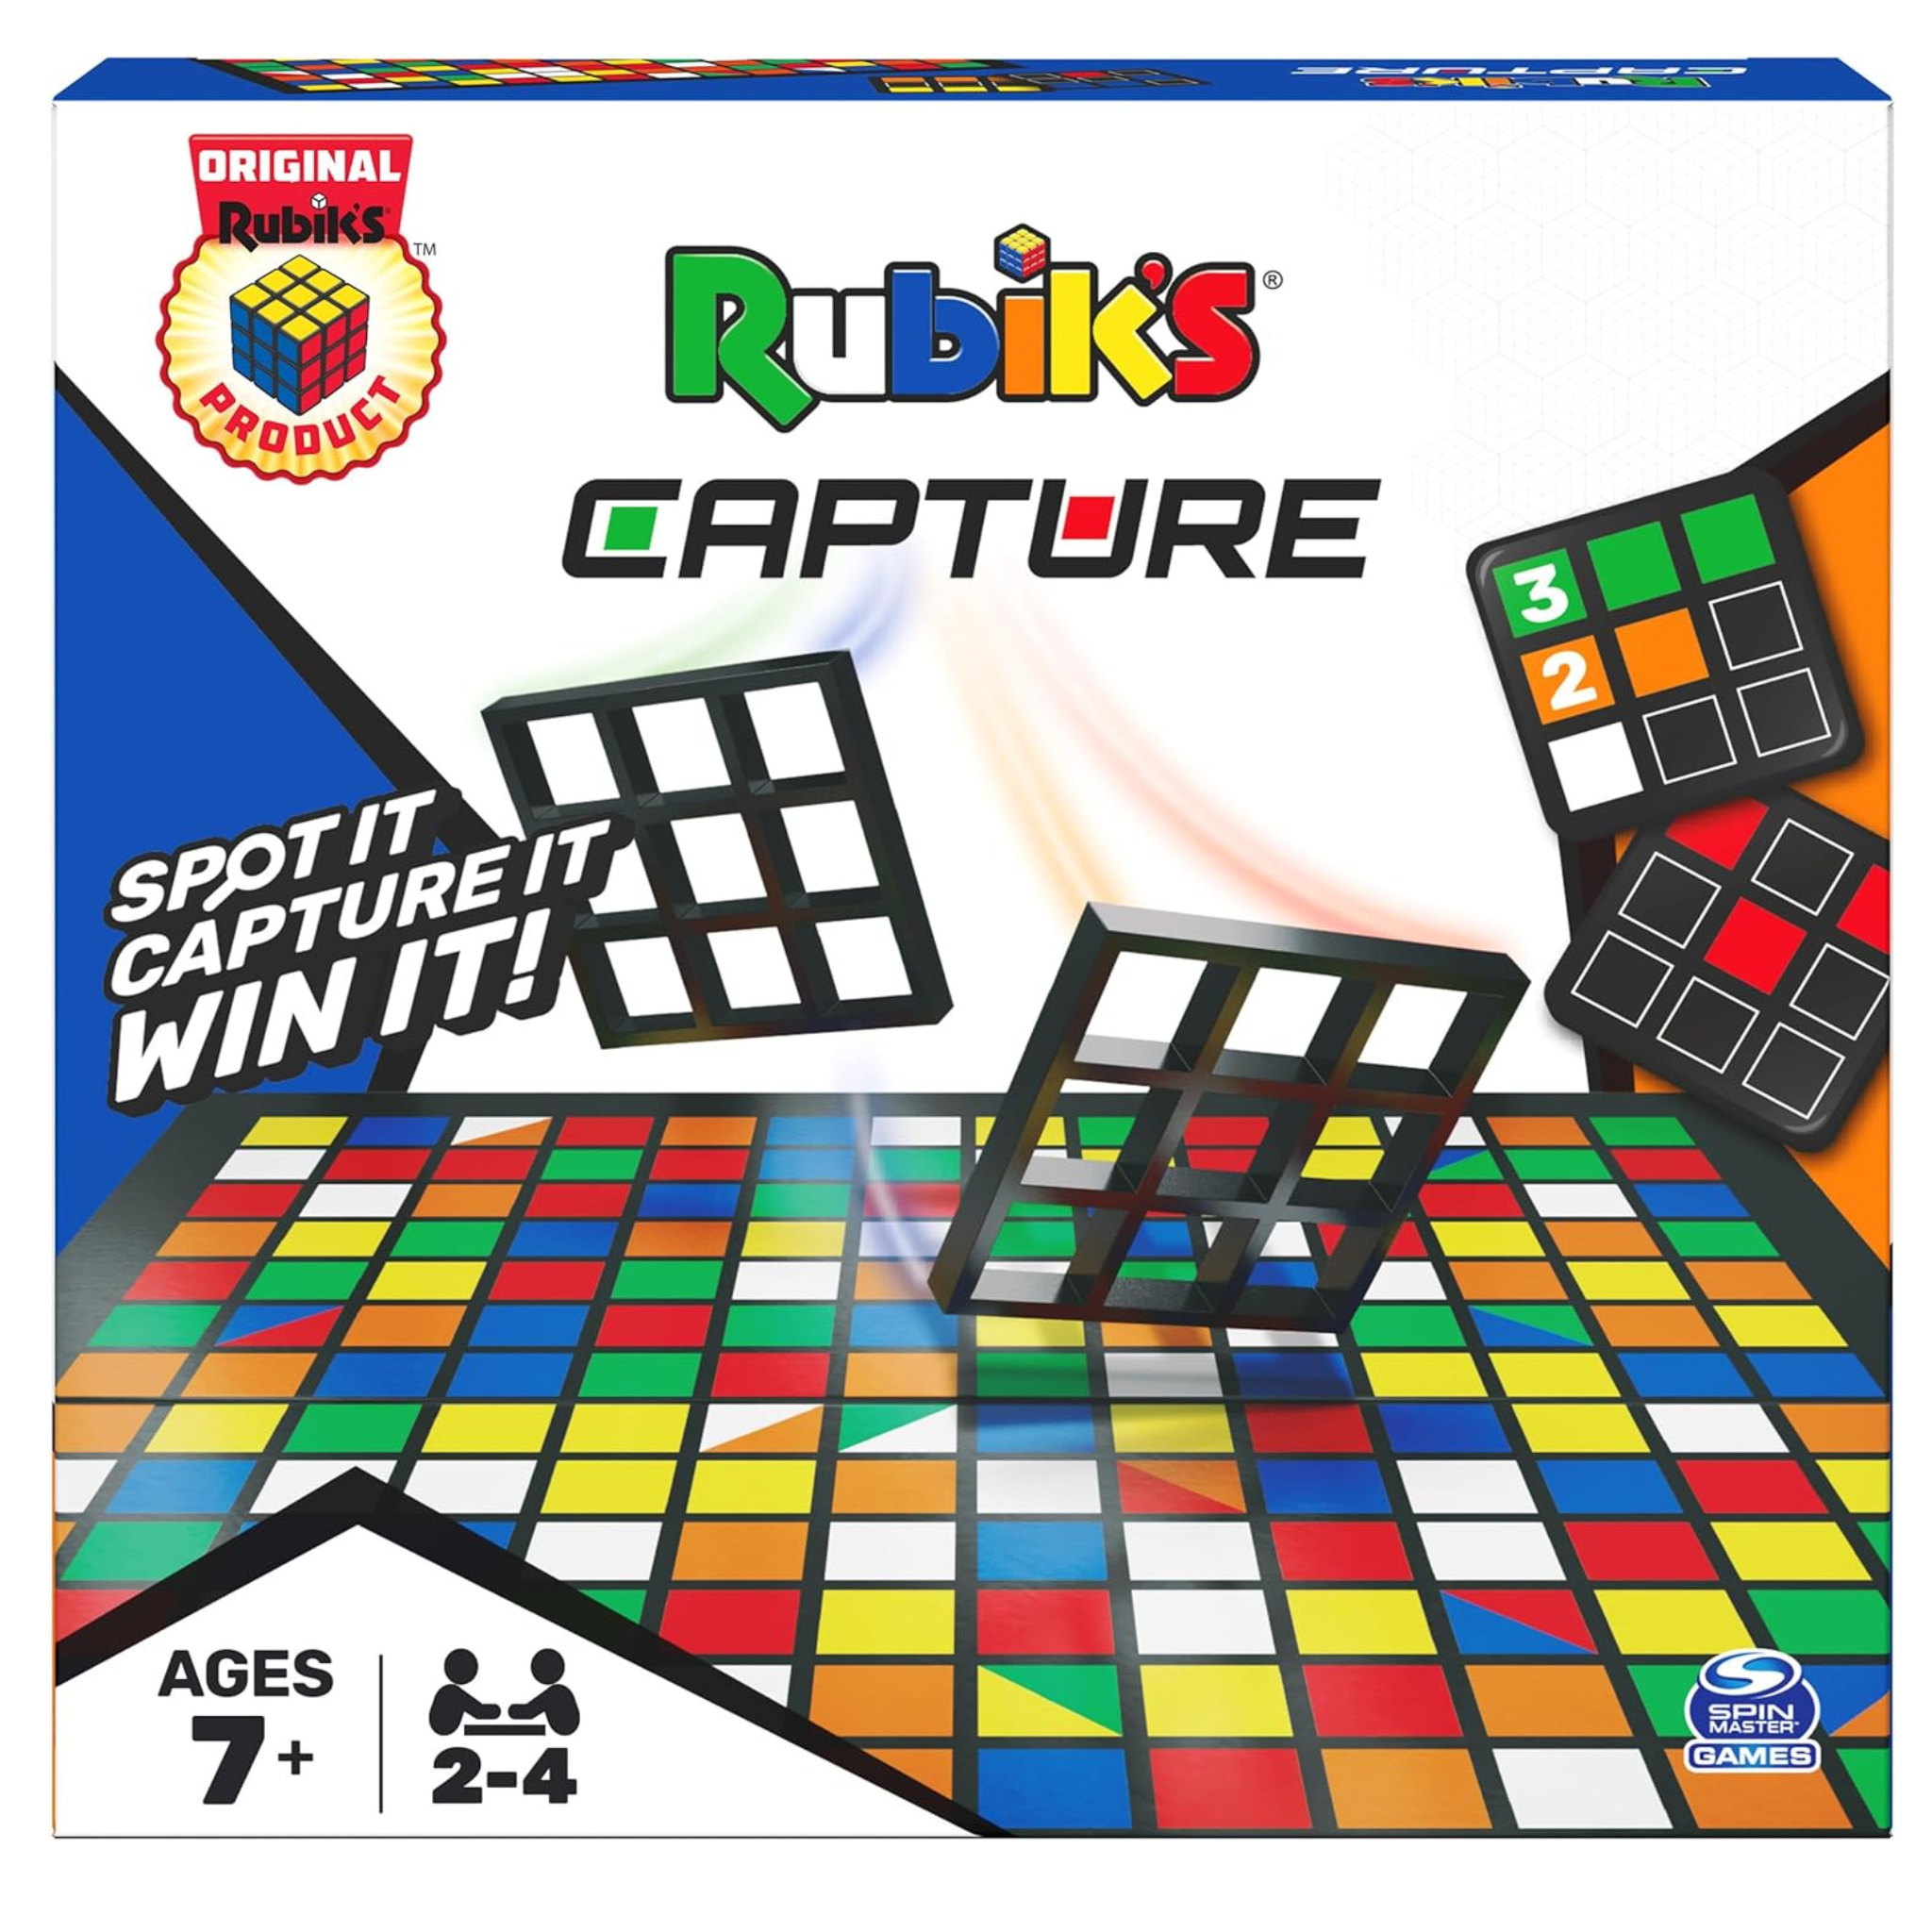 Rubik's Capture Classic Puzzle Strategy Game